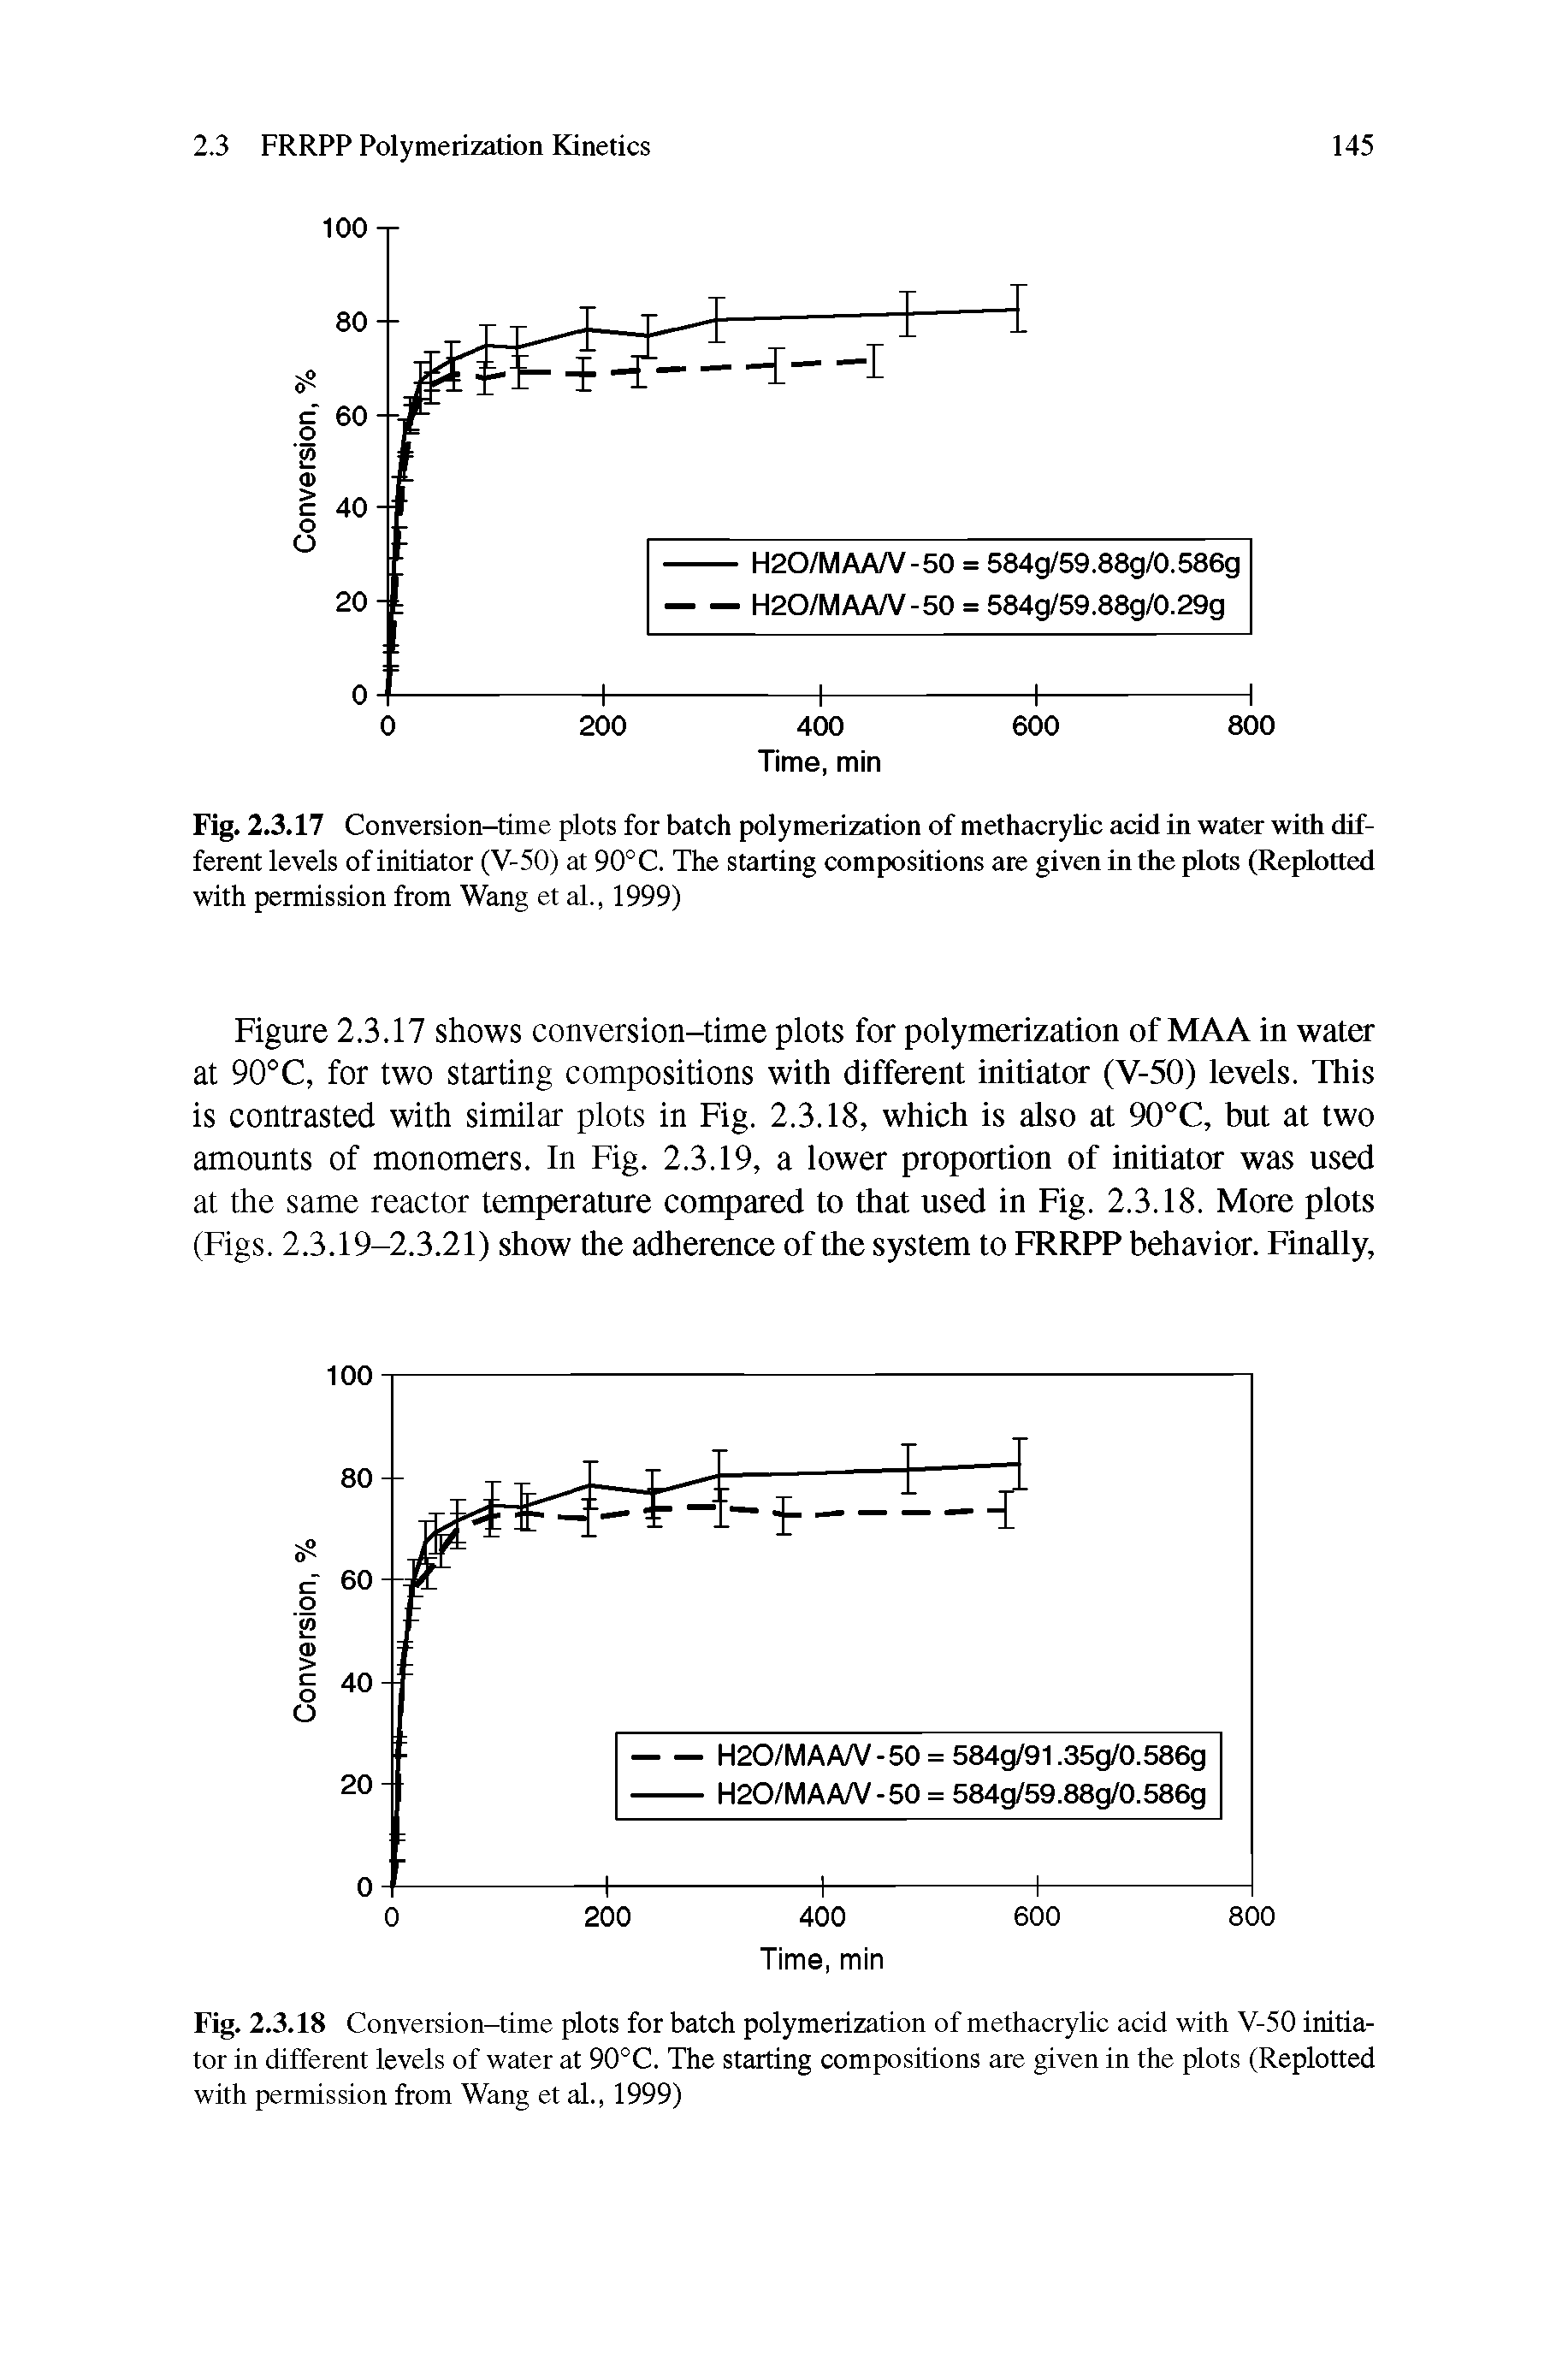 Fig. 2.3.18 Conversion-time plots for batch polymerization of methacrylic acid with V-50 initiator in different levels of water at 90°C. The starting compositions are given in the plots (Replotted with permission from Wang et al., 1999)...